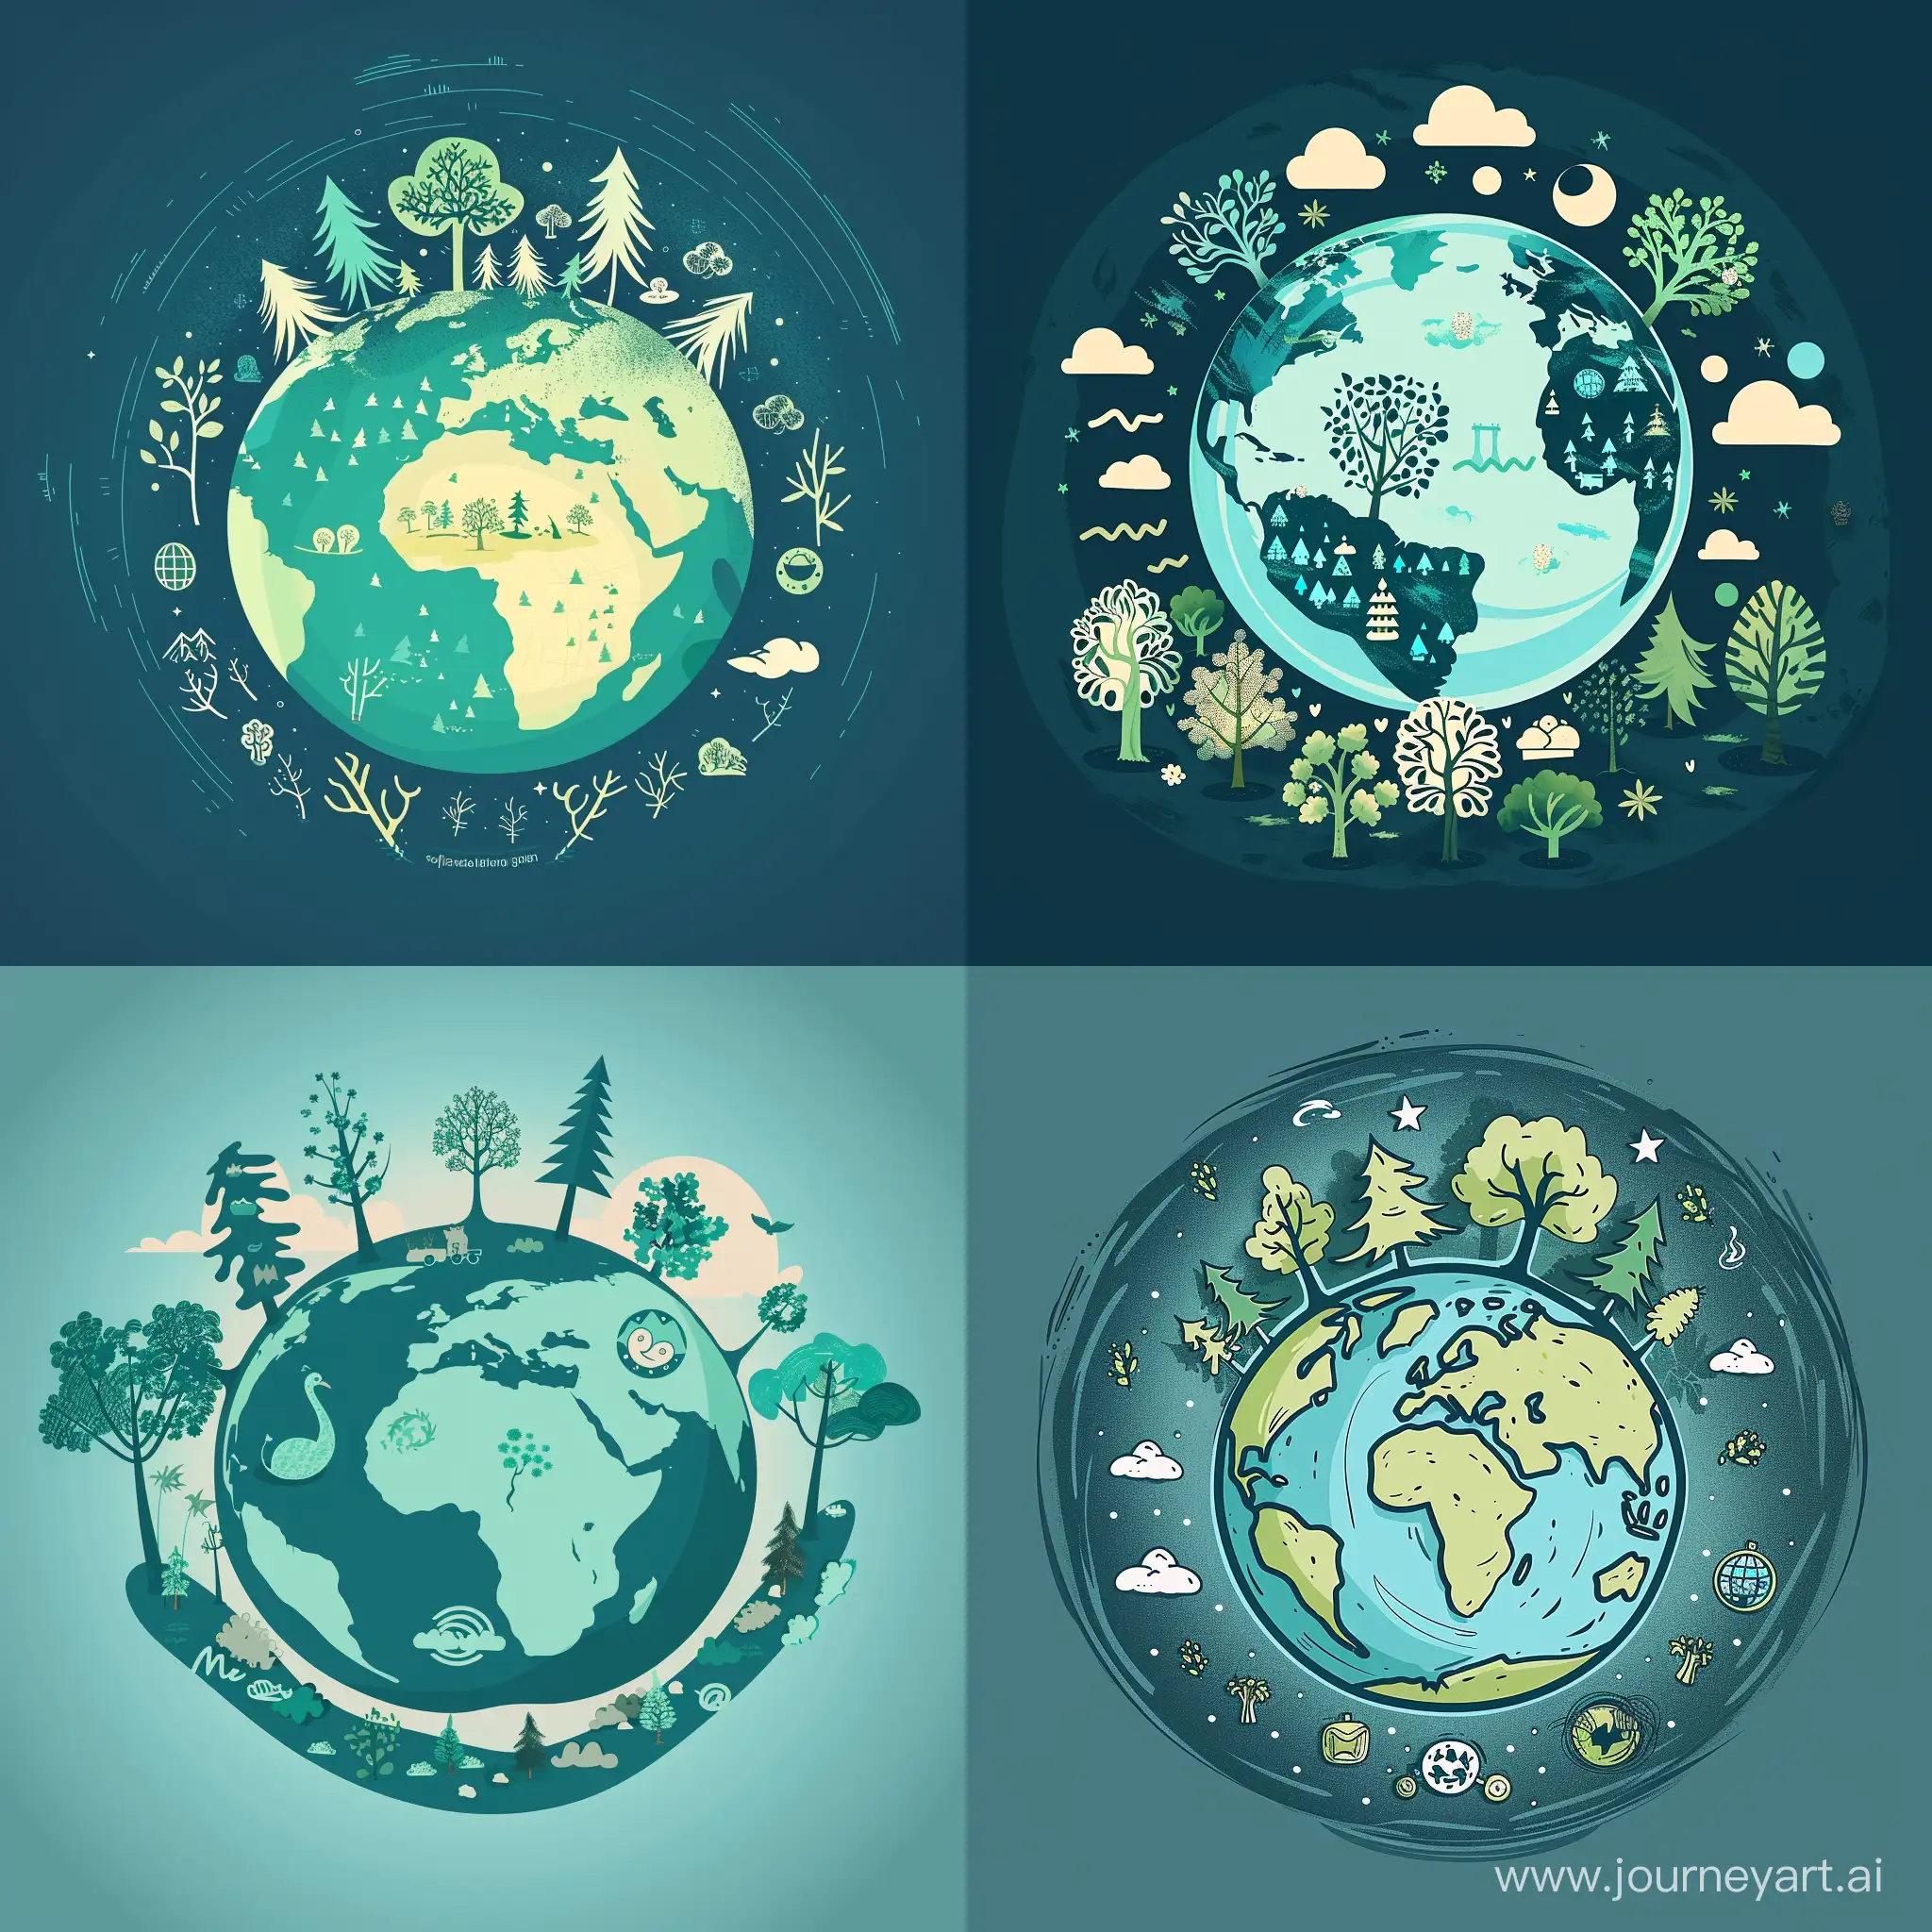 Cartoonish-Earth-with-Trees-and-Environmental-Icons-in-Teal-and-Blue